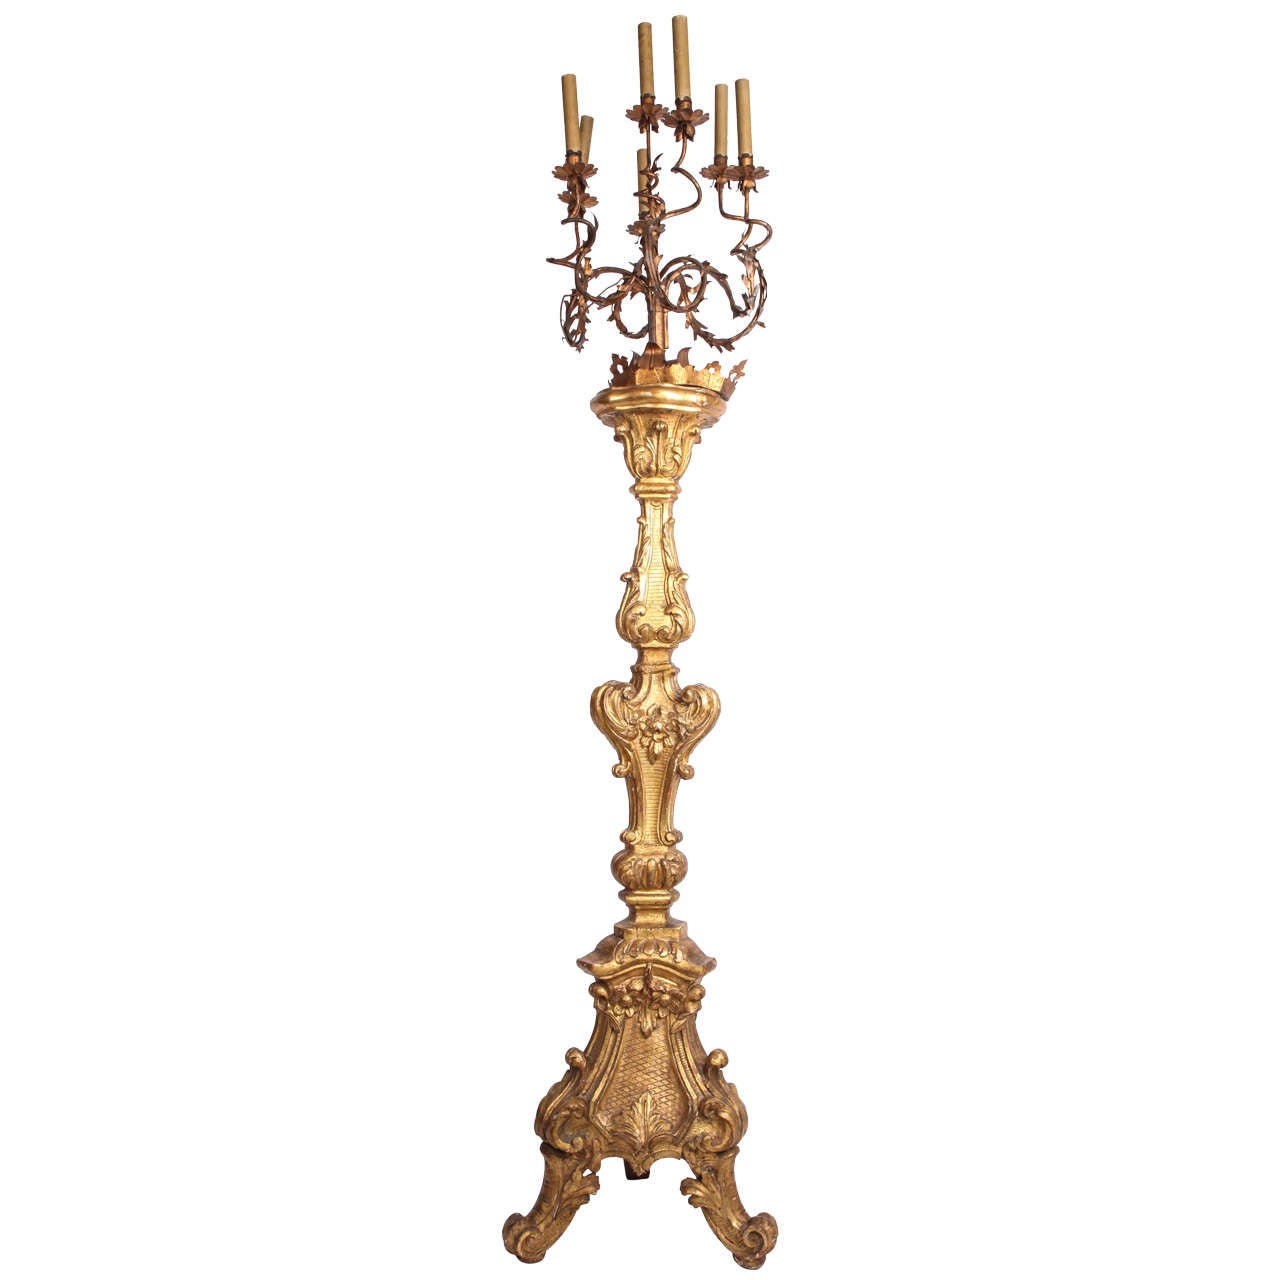 Italian Early 18th Century Giltwood Torchiere or Floor Lamp 1720